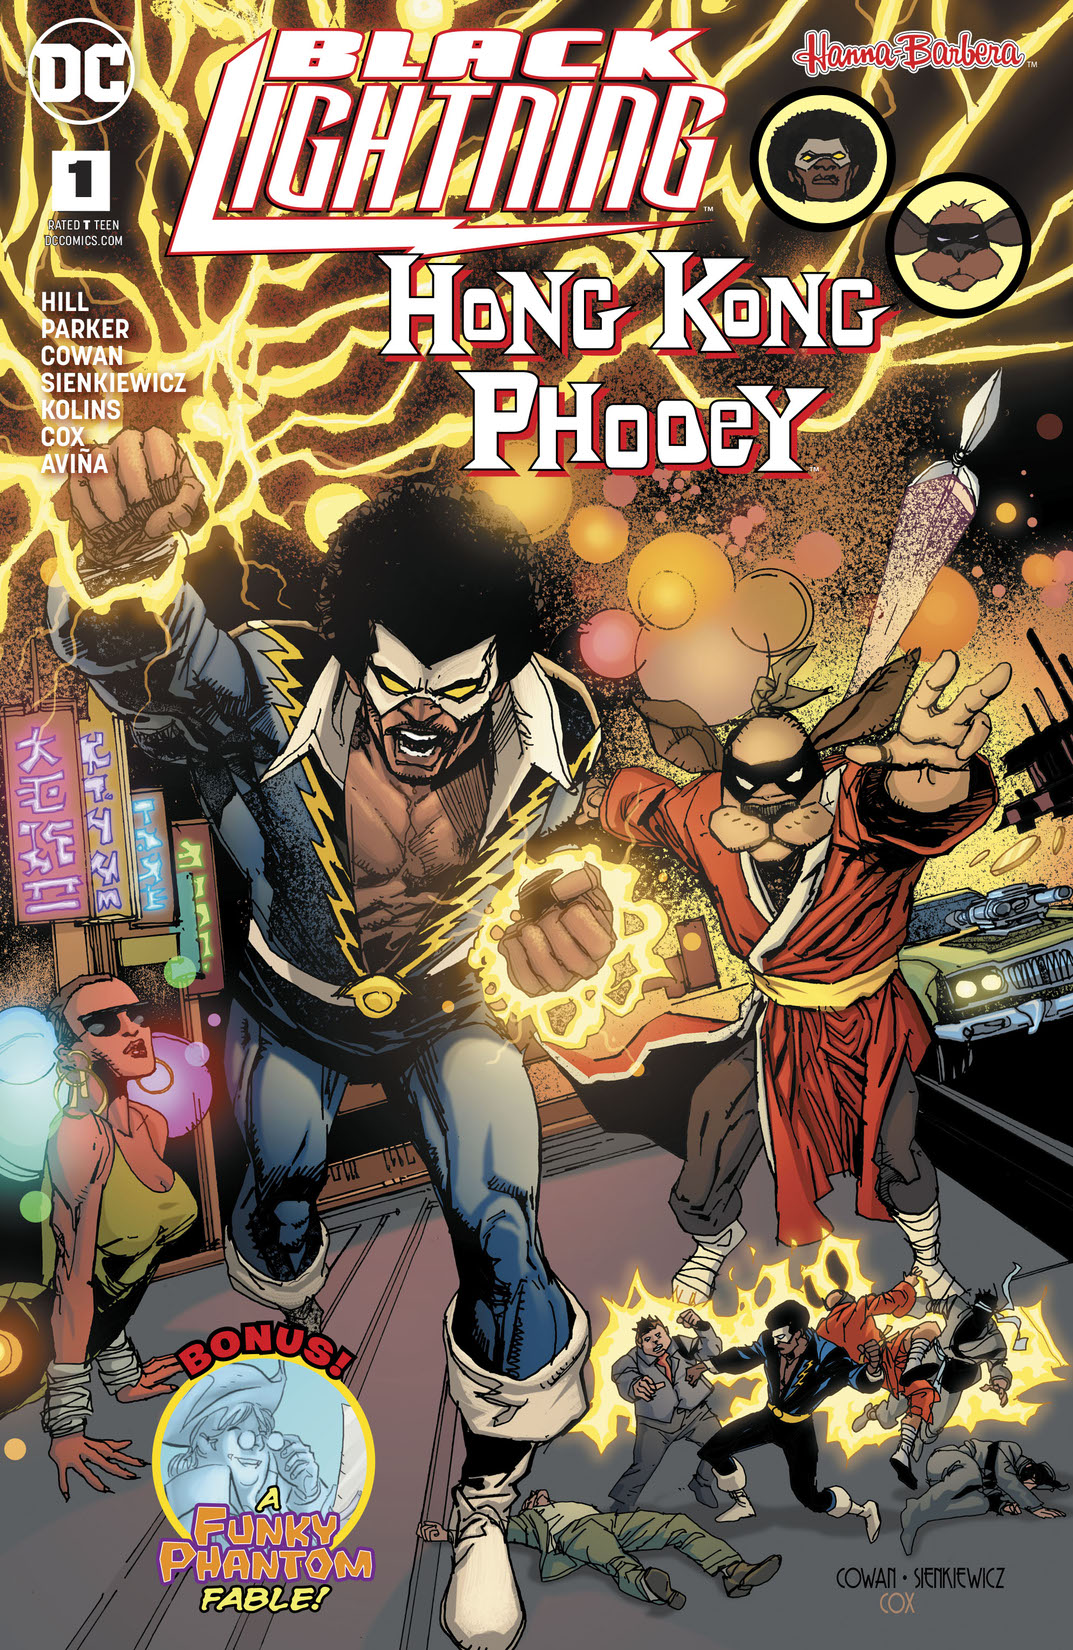 Black Lightning/Hong Kong PHOOEY Special #1 preview images